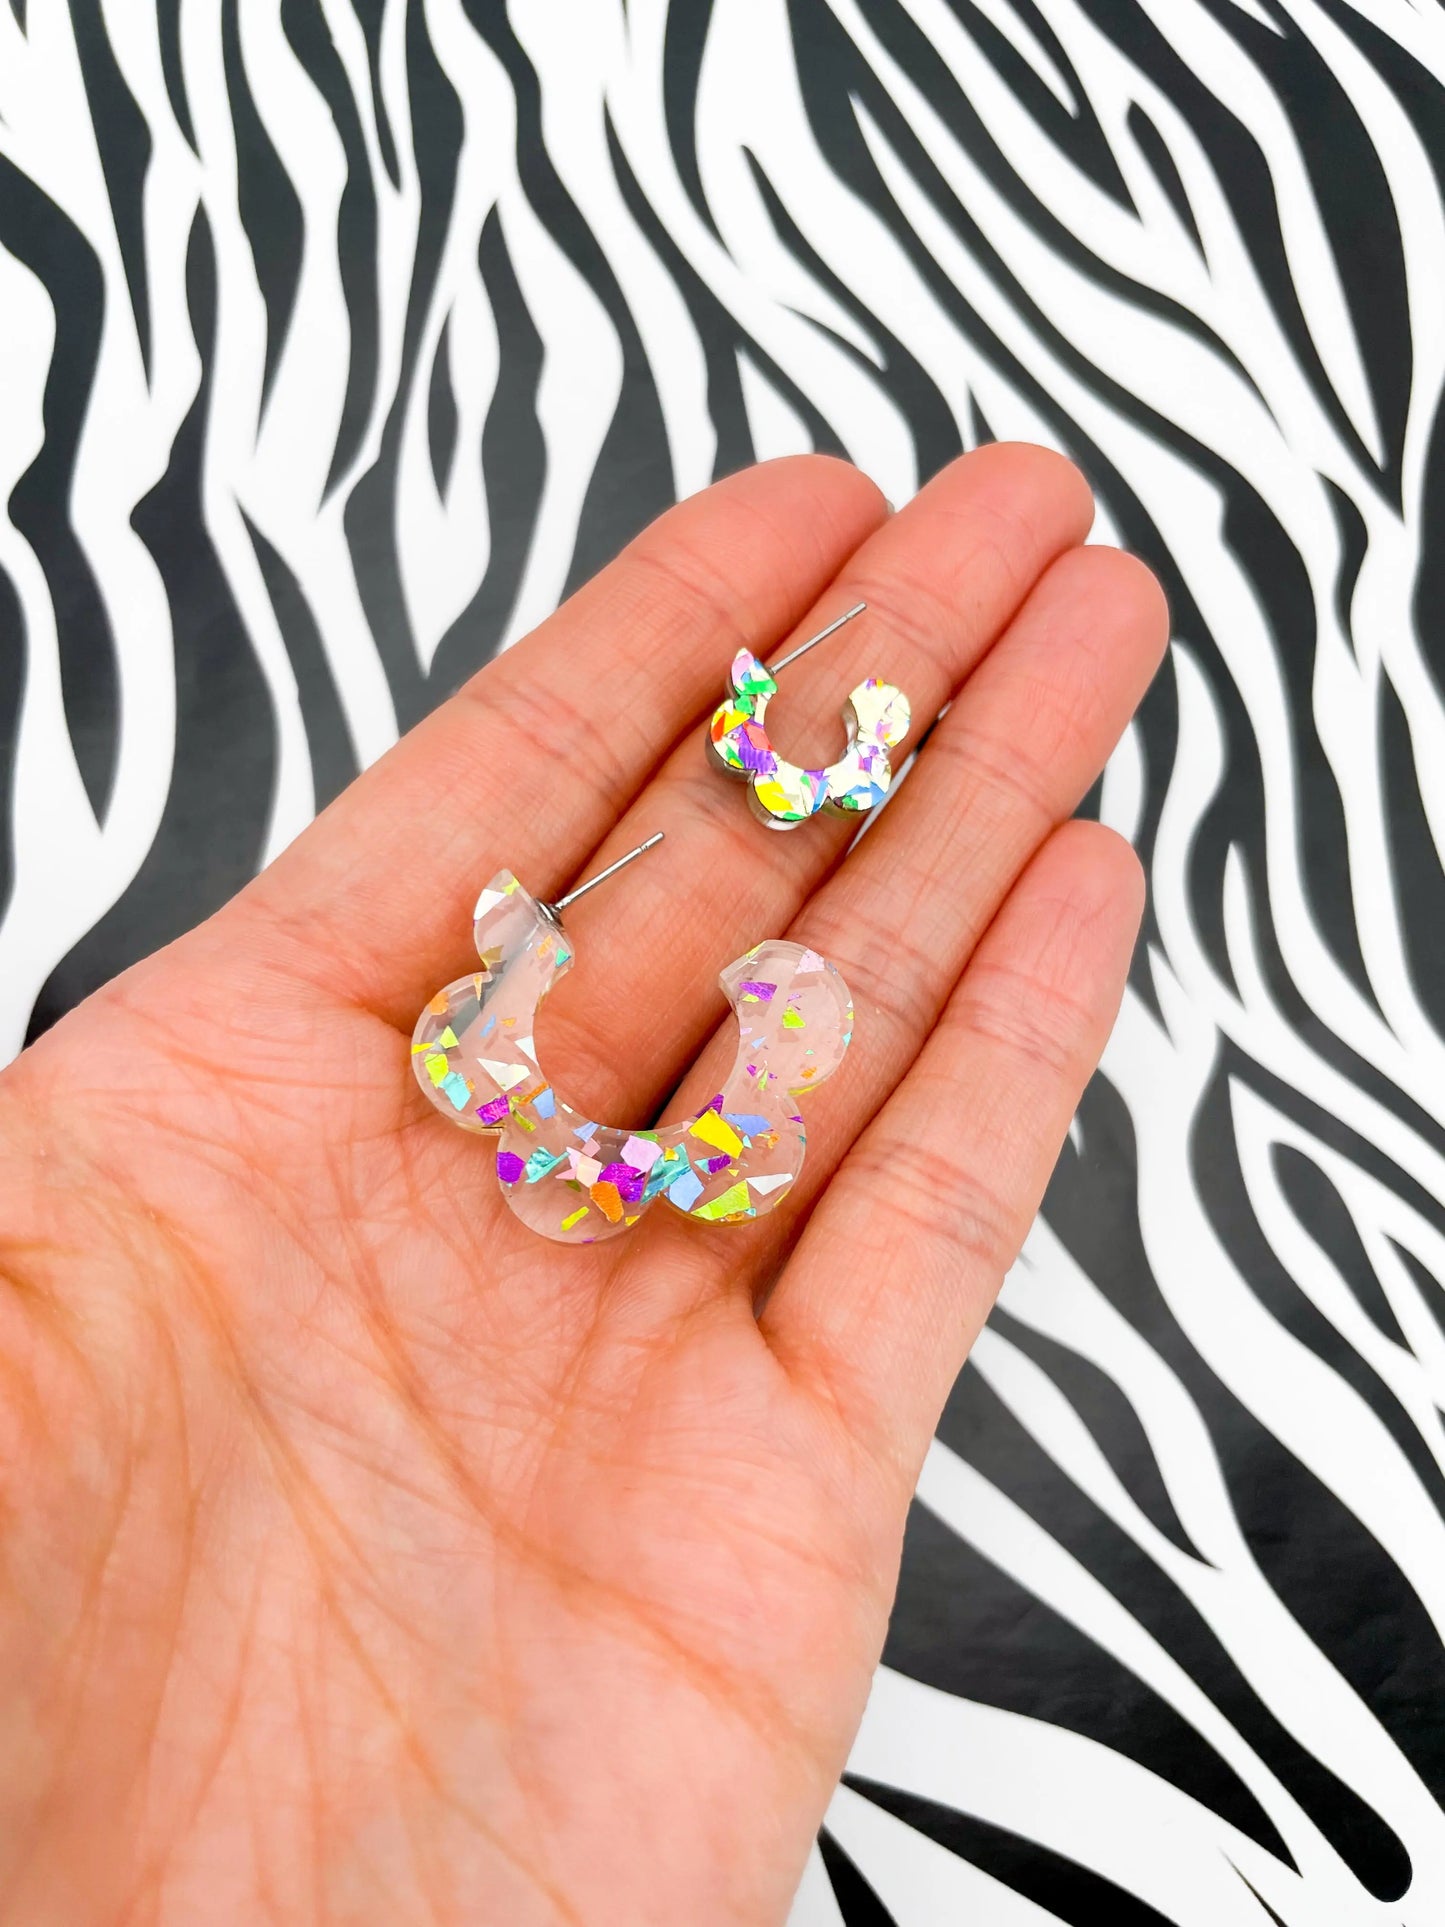 Large Holographic Rainbow Chunky Glitter Acrylic Flower Hoops from Sapphire Frills